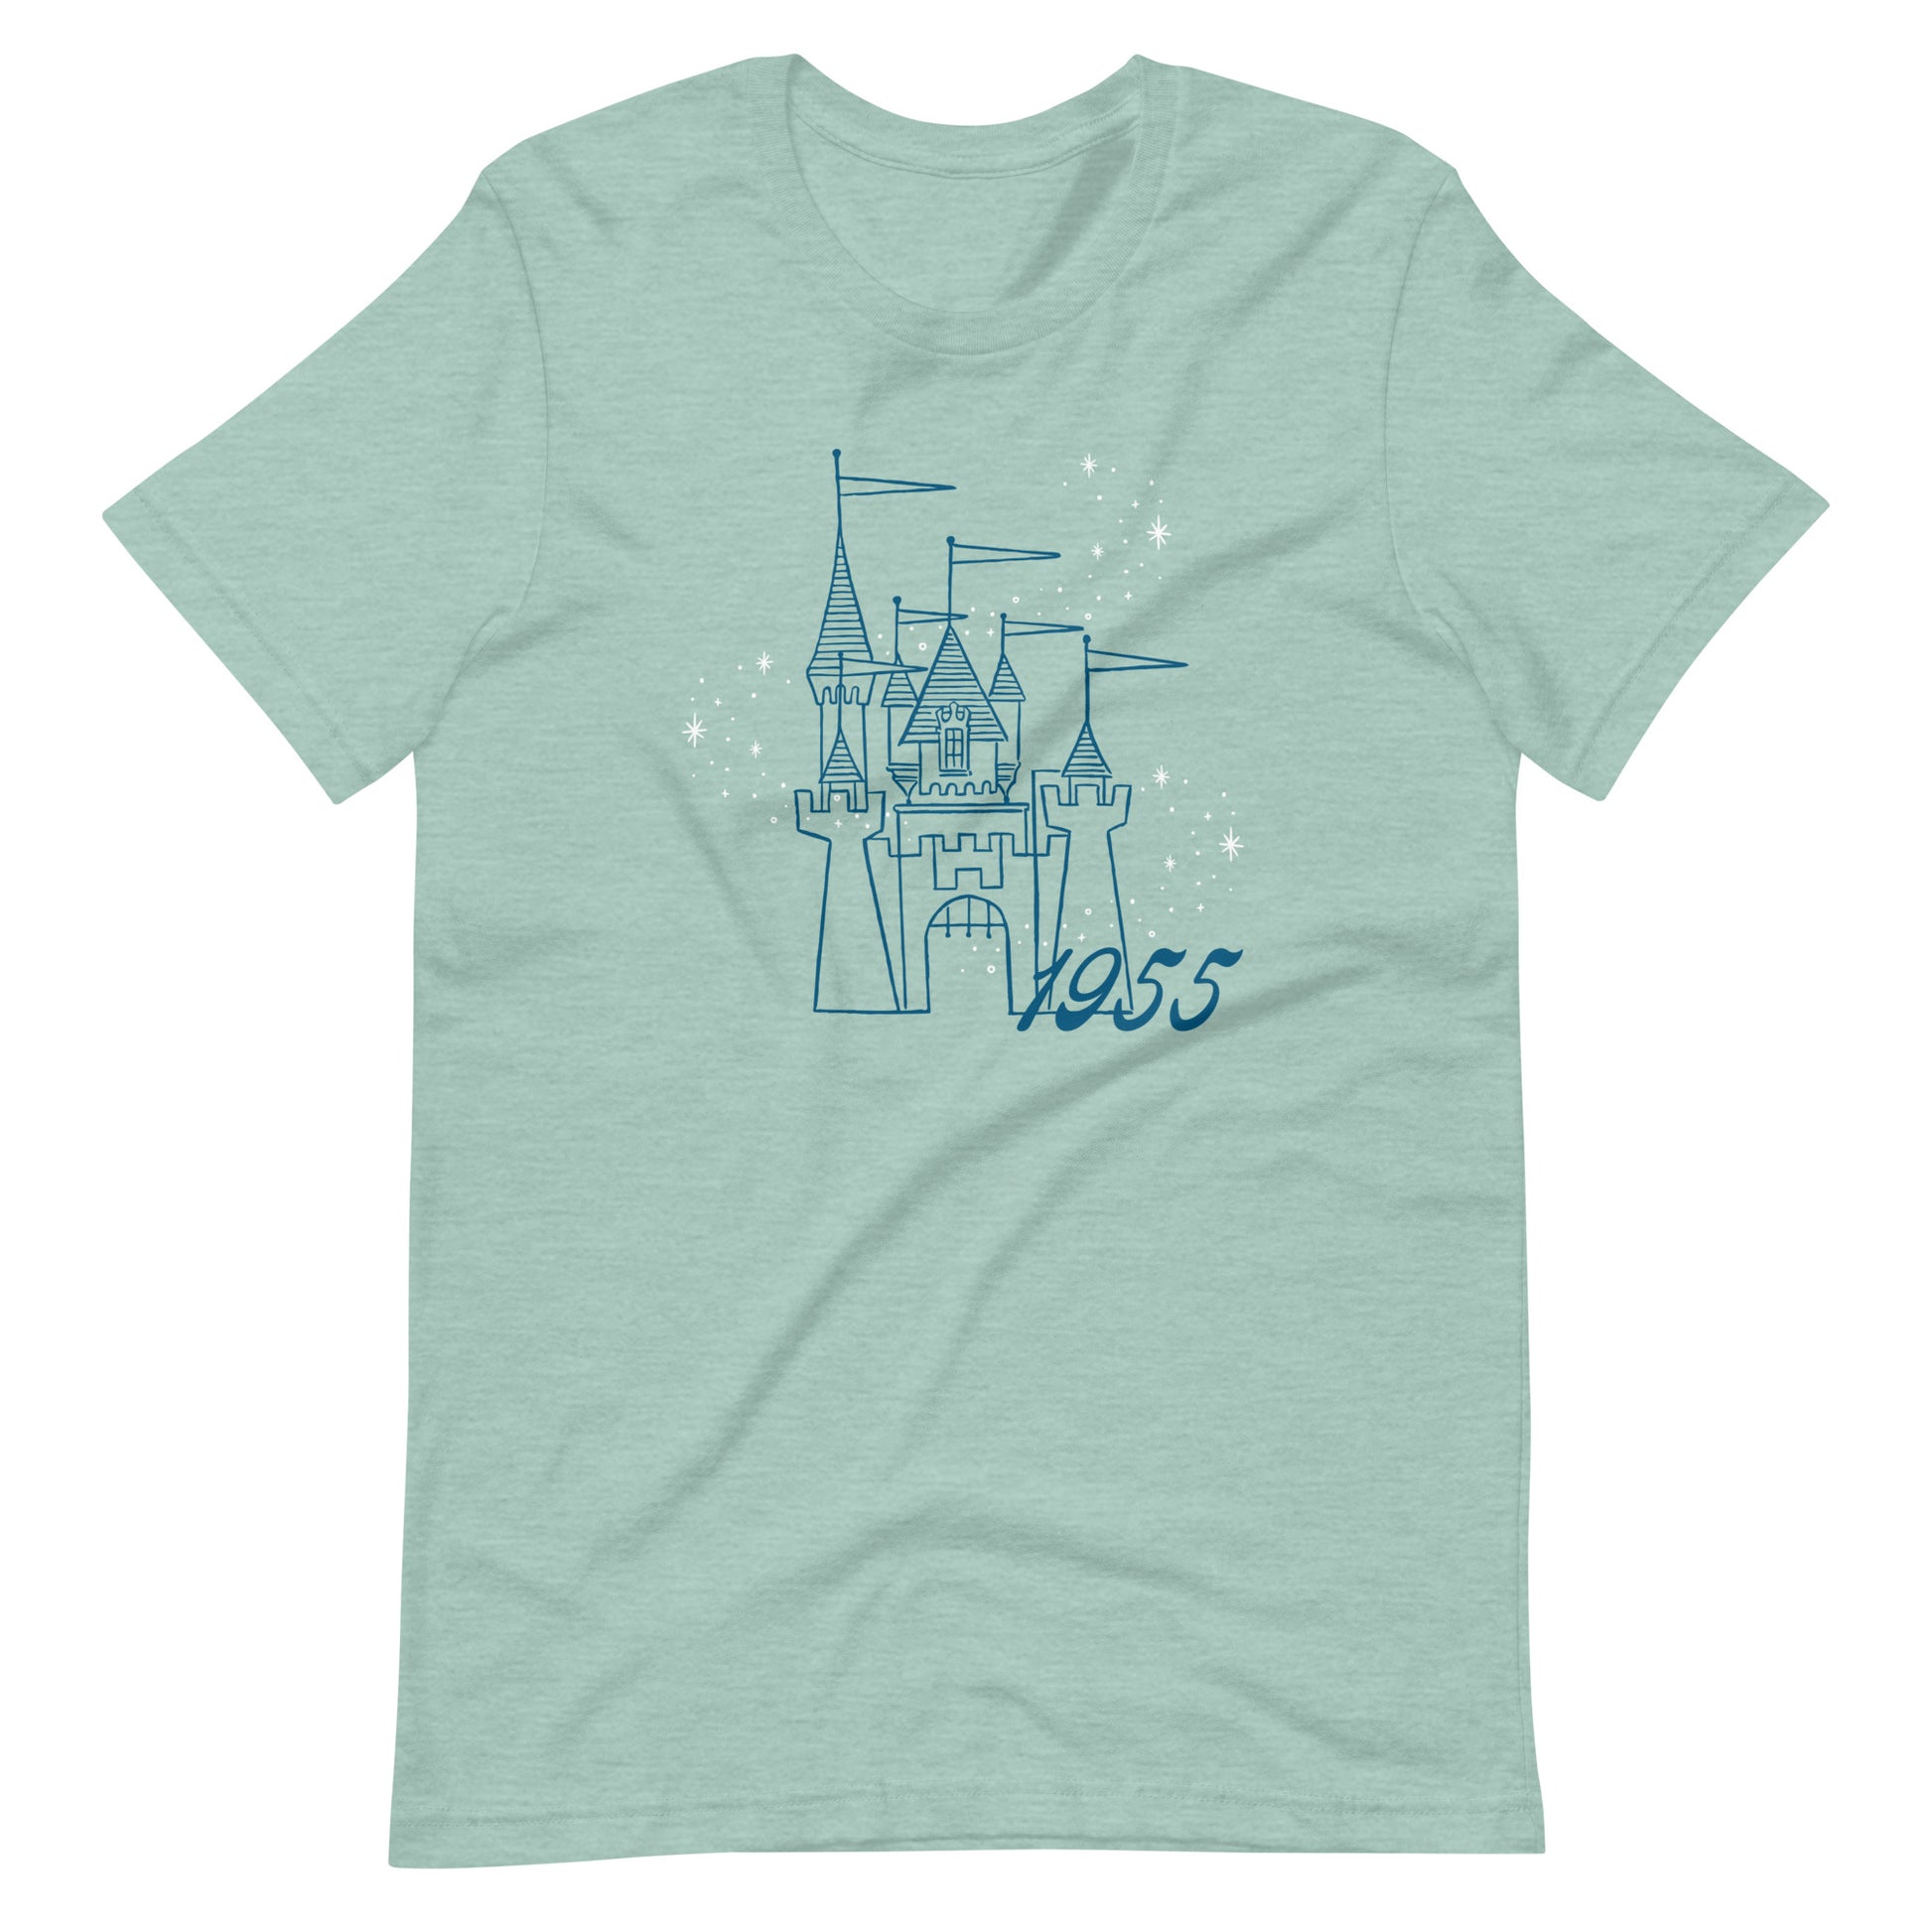 Dusty blue t-shirt printed with vintage style sketch of the Disneyland Castle with the year 1955 and pixie dust above the castle.